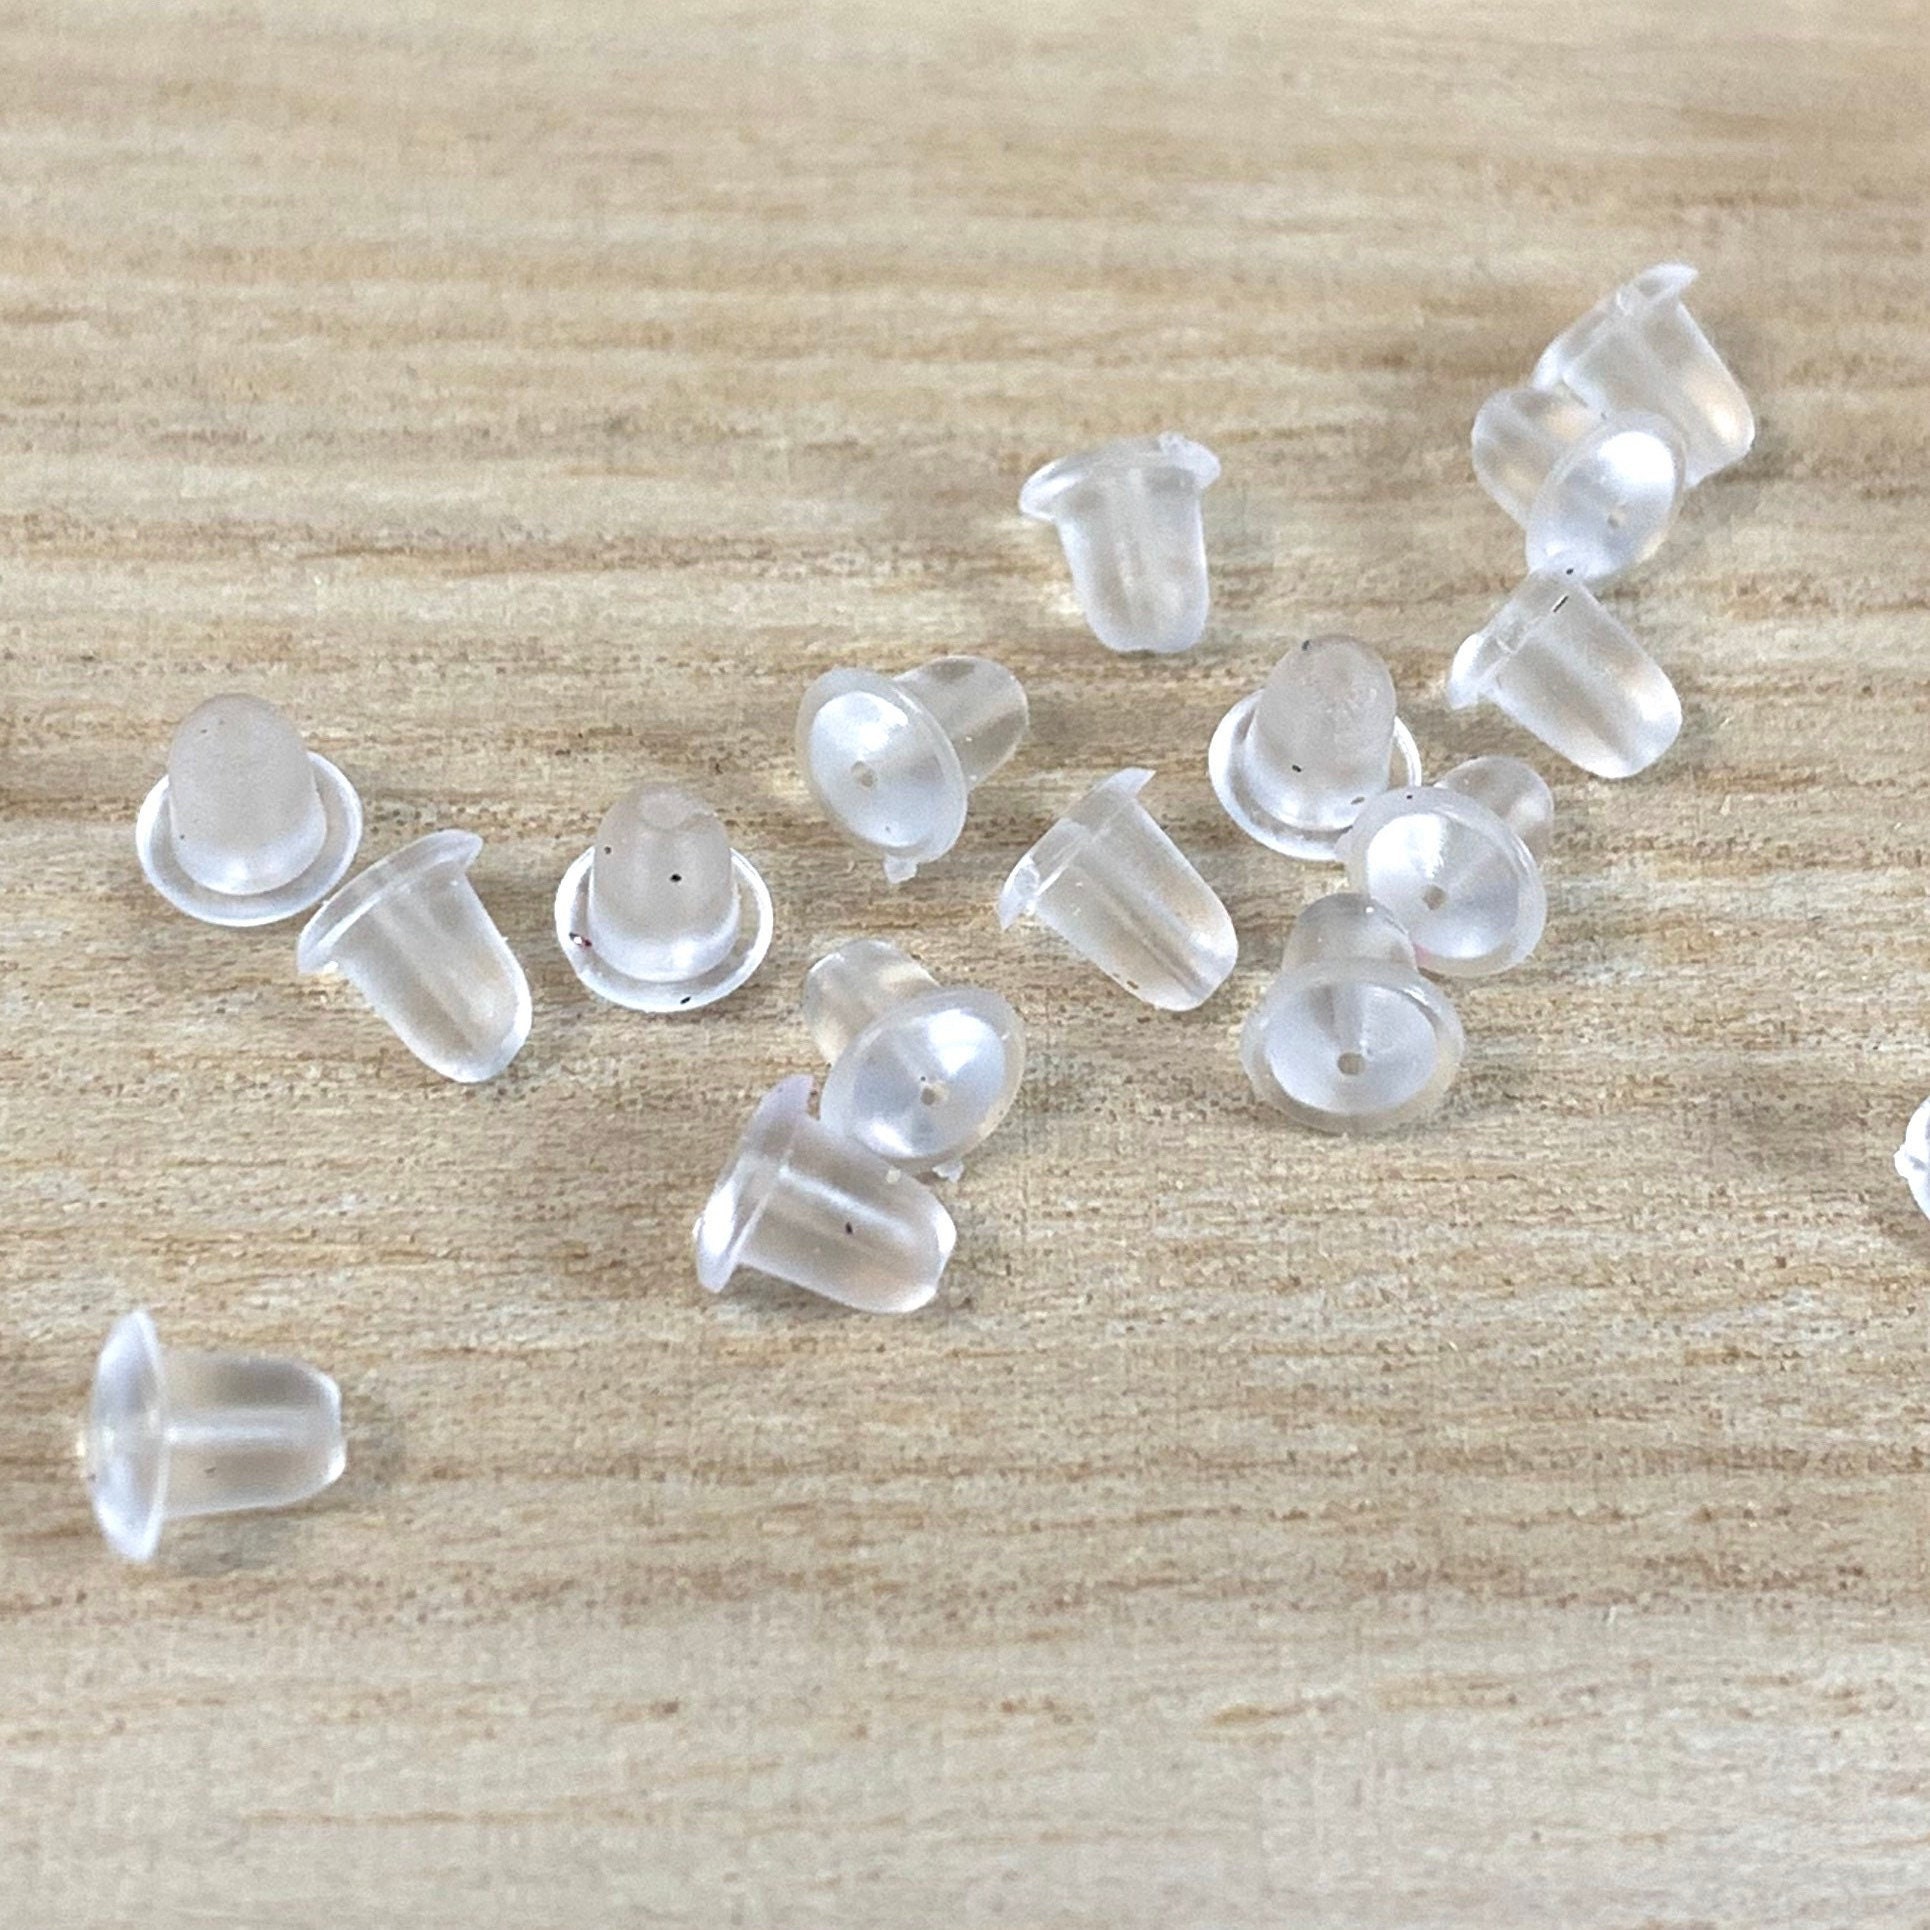 3mm Silicone Cylinder Earring Backs Clear Plastic Rubber Earring Posts  Secure Pierced Back Fish Hook Studs Hypoallergenic Stopper 1000pcs 